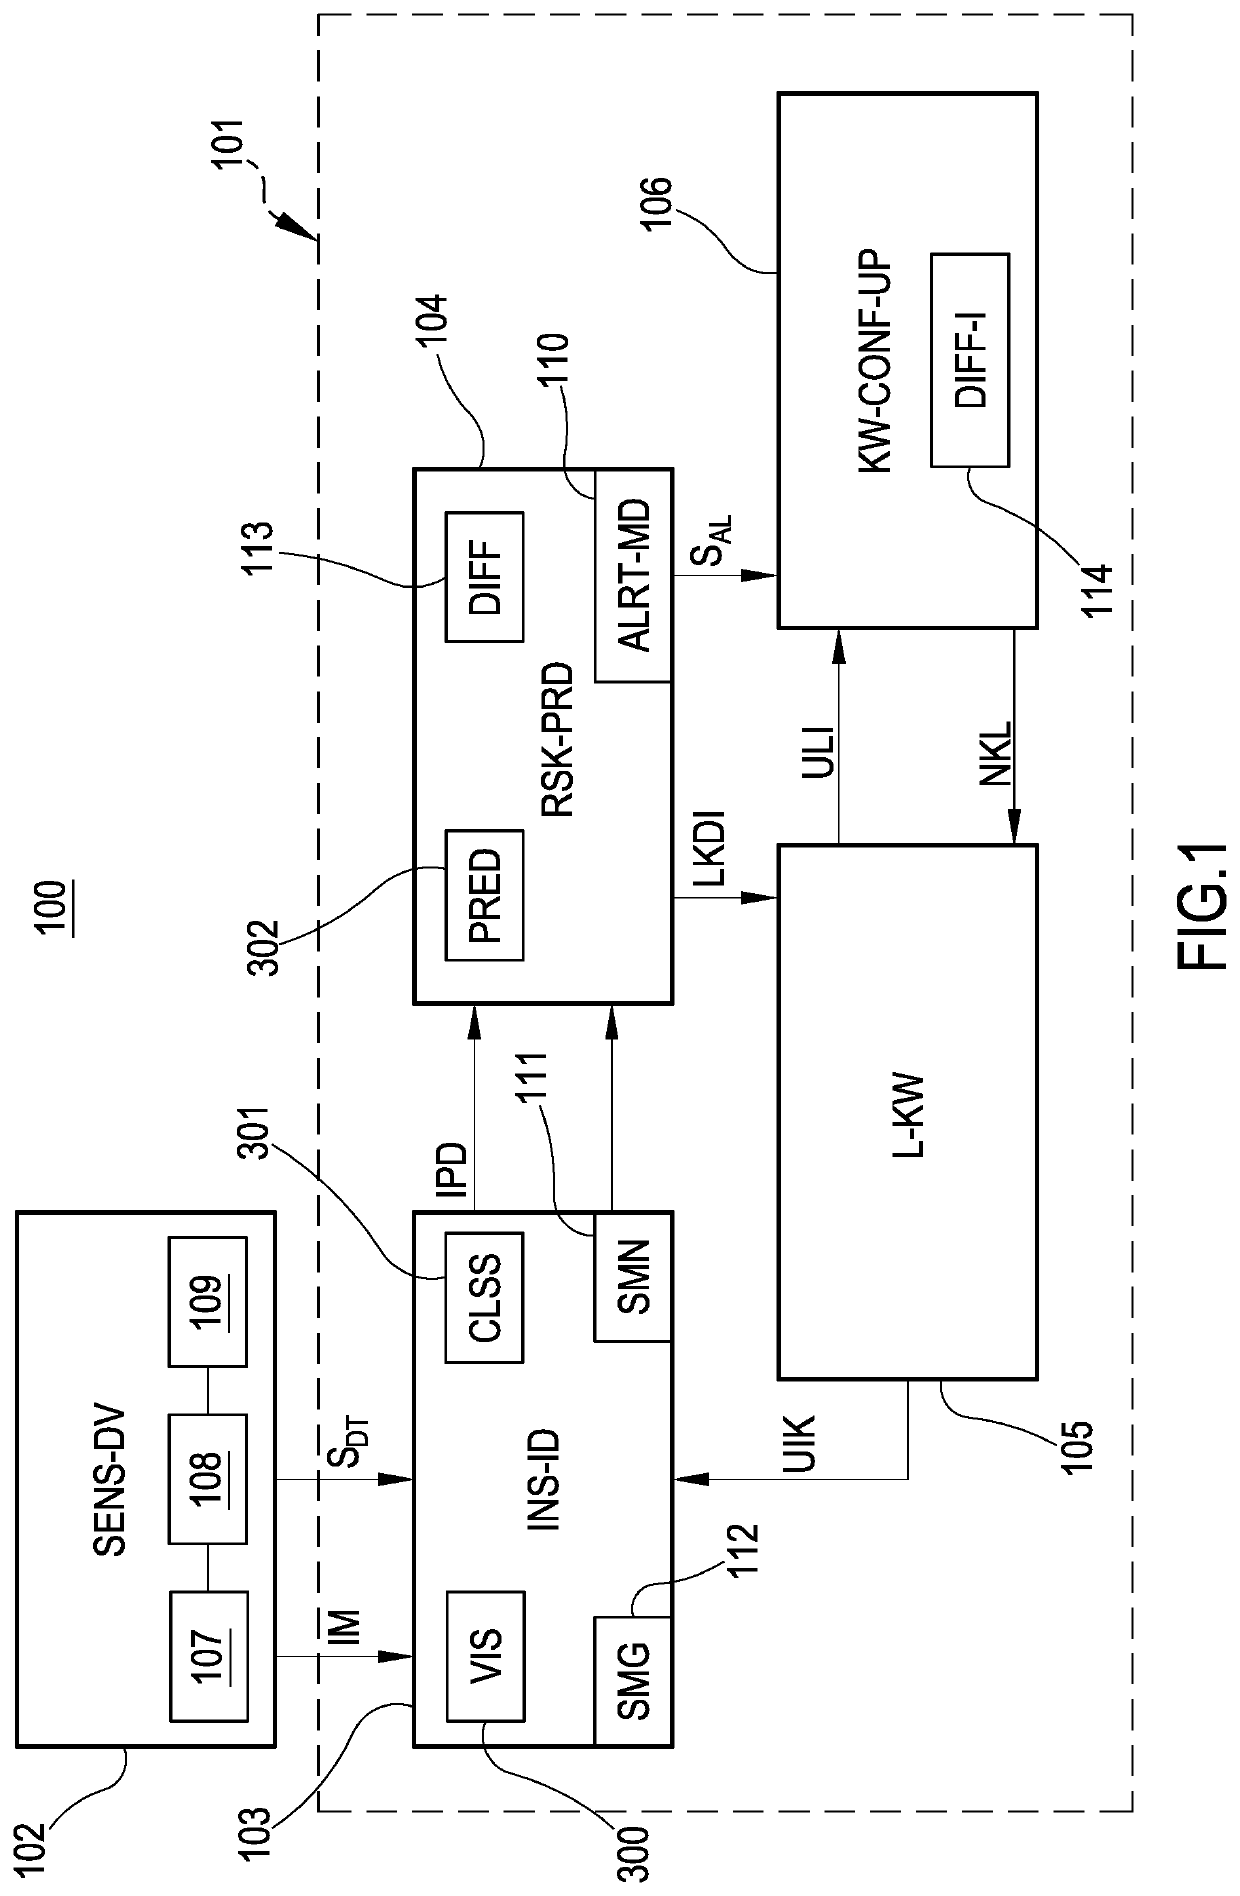 Insect attack risk prediction system and method